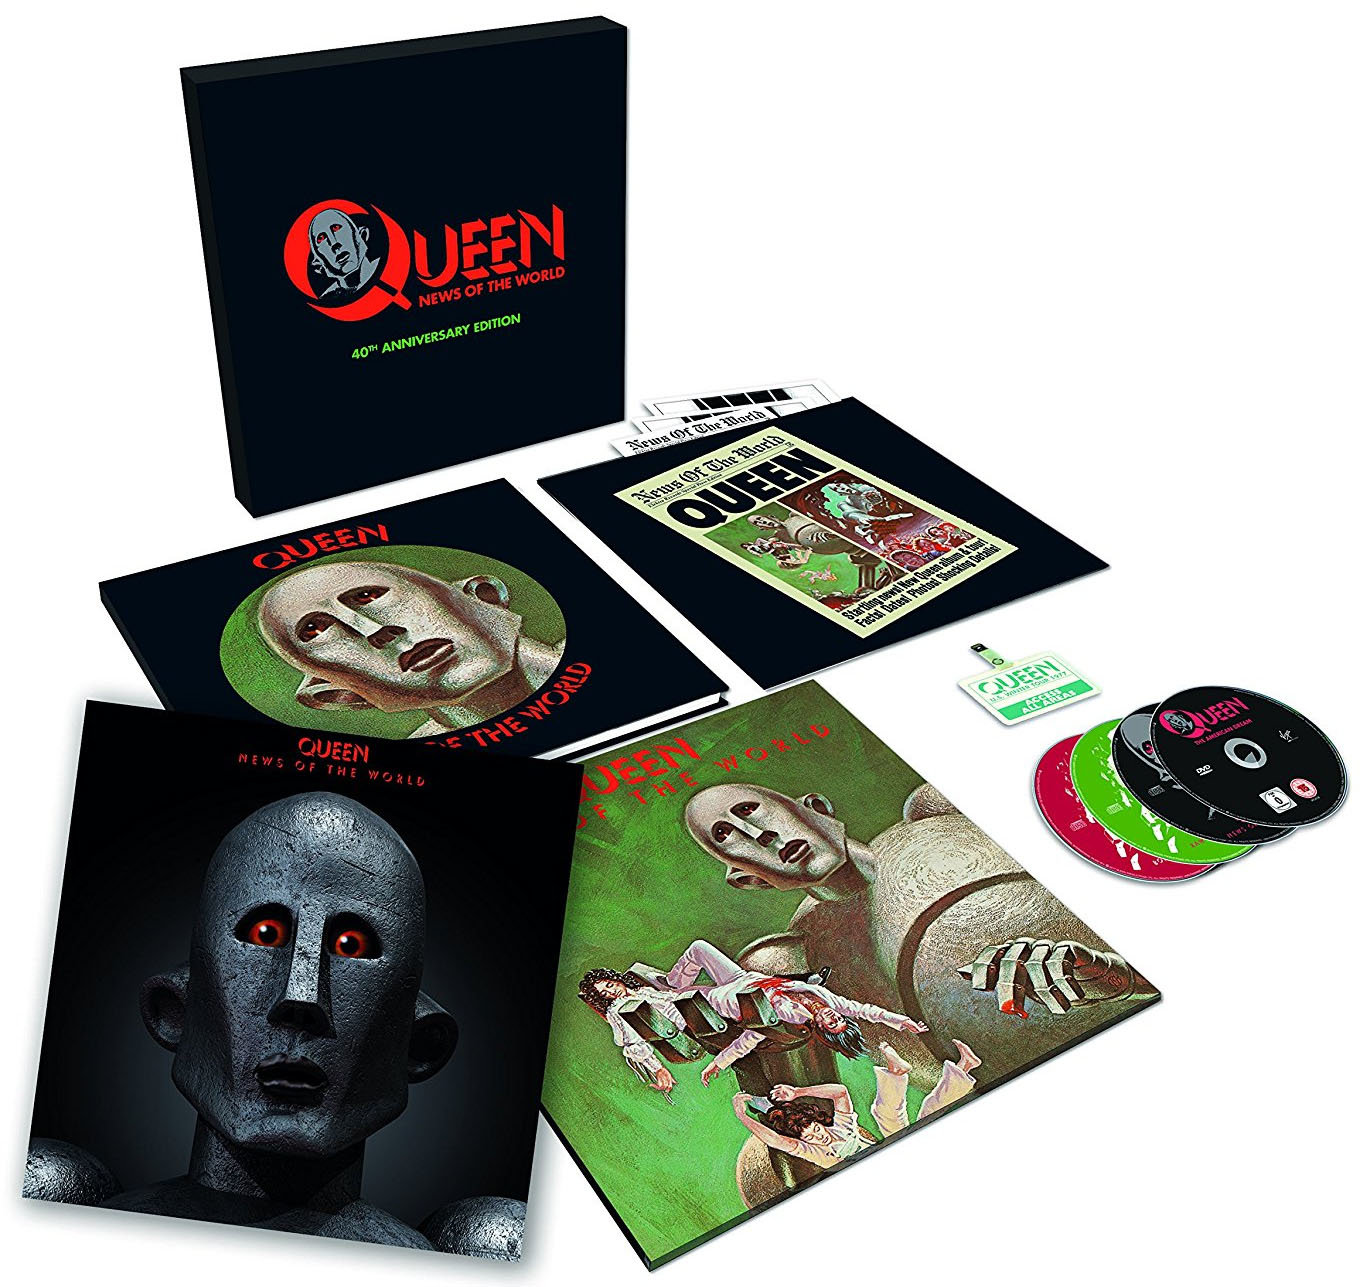 Queen : News Of The World (Super Deluxe Box Set)